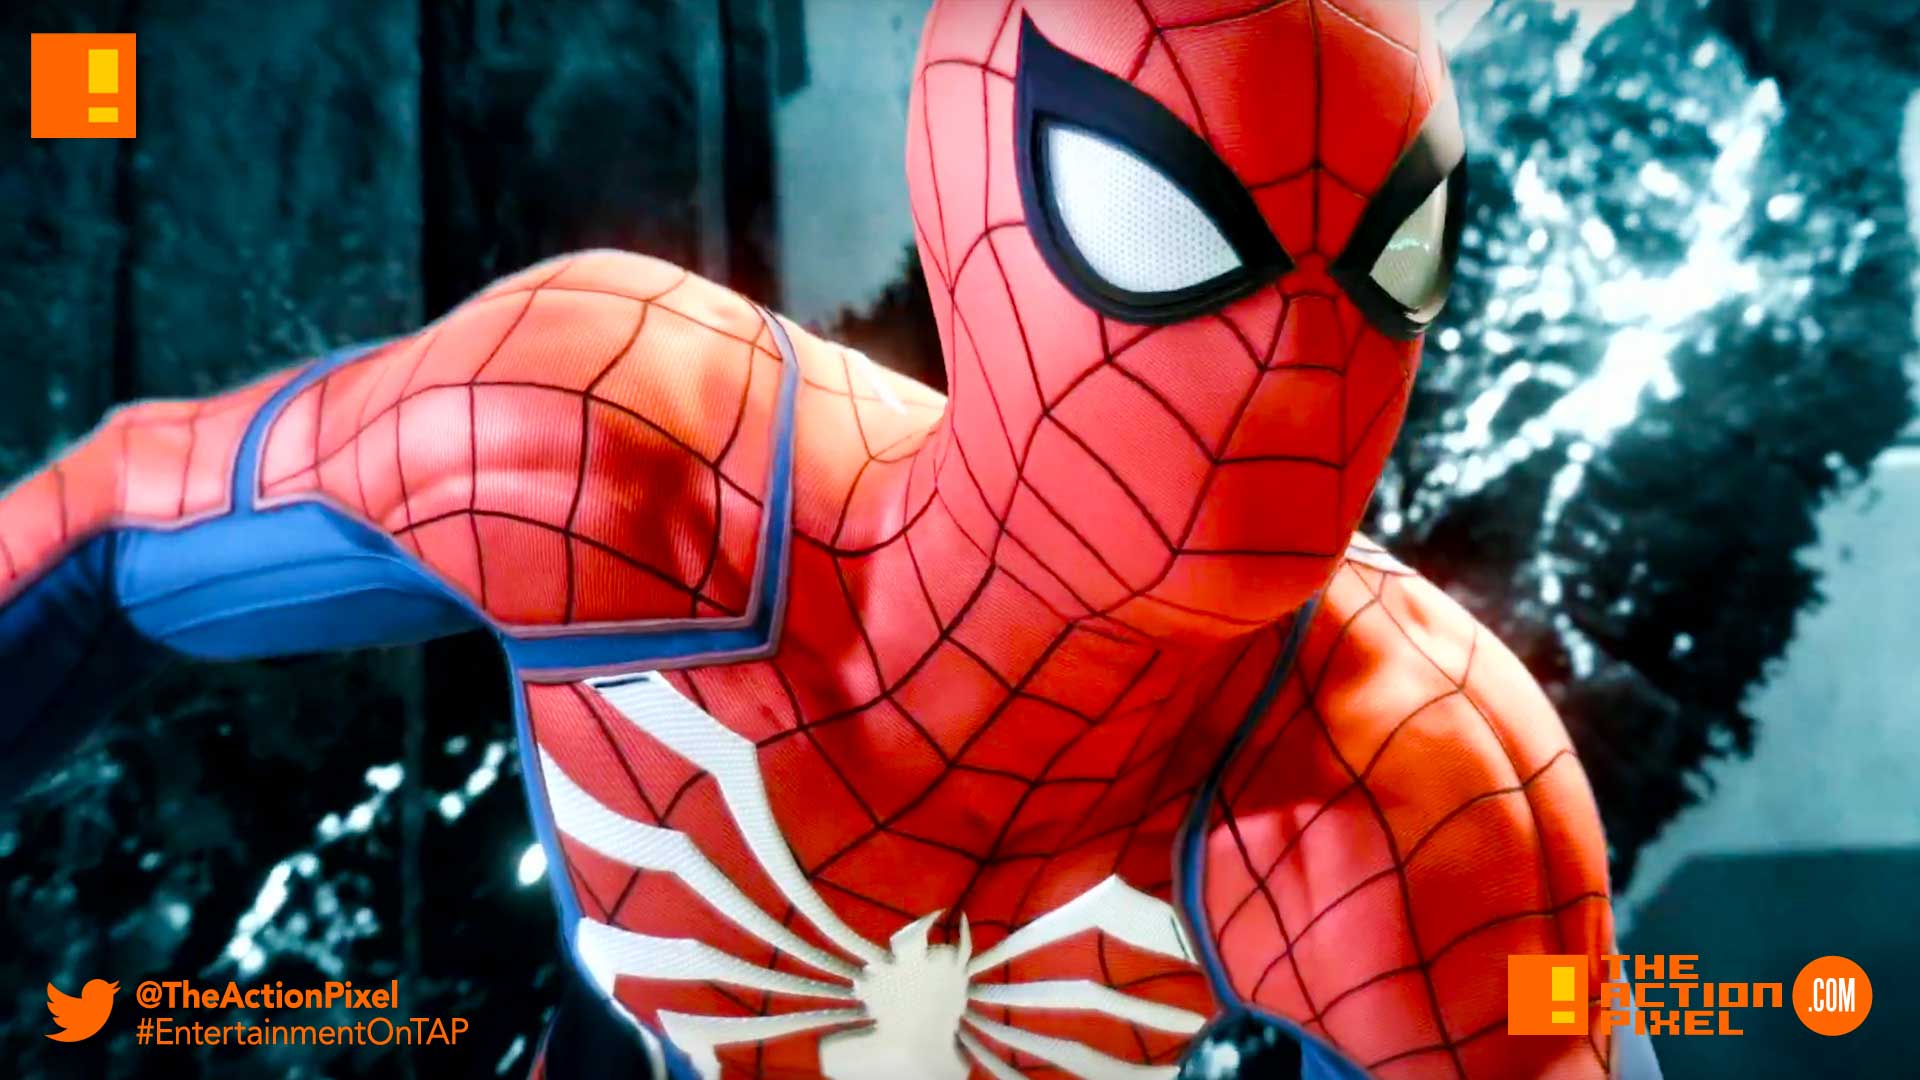 spiderman ps4,spider-man, marvel, marvel's spider-man,ps4,playstation 4, playstation, peter parker, demons, wilson fisk, fisk, king pin, gameplay trailer, e3 , e3 2017, electronic entertainment expo, marvel comics,the action pixel, entertainment on tap, insomniac games, e3 gameplay,sony e3,e3 2018, gameplay launch trailer,spiderman ps4,spider-man, marvel, marvel's spider-man,ps4,playstation 4, playstation, peter parker, demons, wilson fisk, fisk, king pin, gameplay trailer, e3 , e3 2017, electronic entertainment expo, marvel comics,the action pixel, entertainment on tap, insomniac games, e3 gameplay,sony e3,e3 2018, gameplay launch trailer,